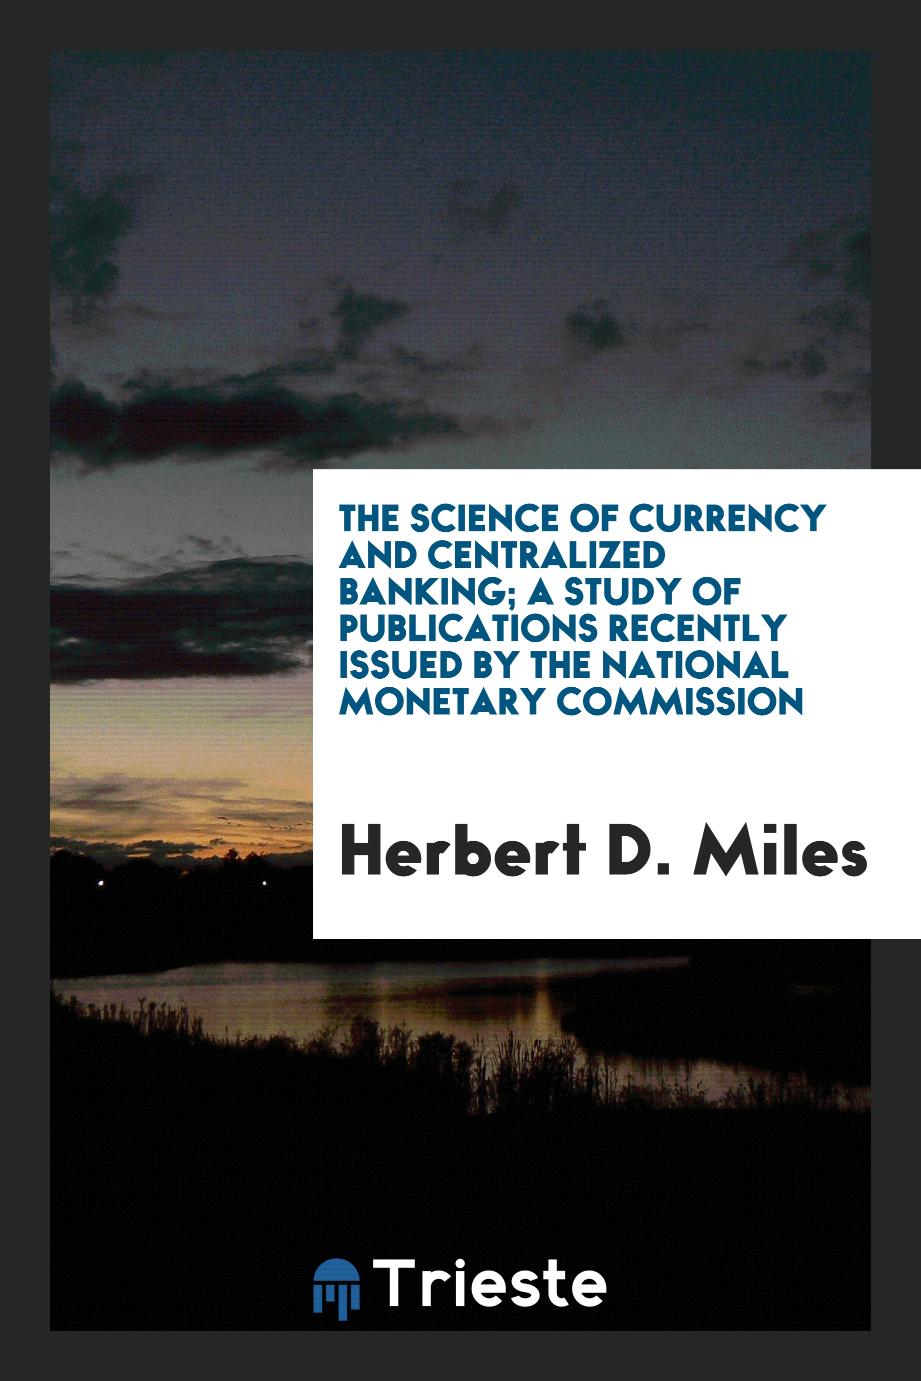 The science of currency and centralized banking; a study of publications recently issued by the National Monetary Commission